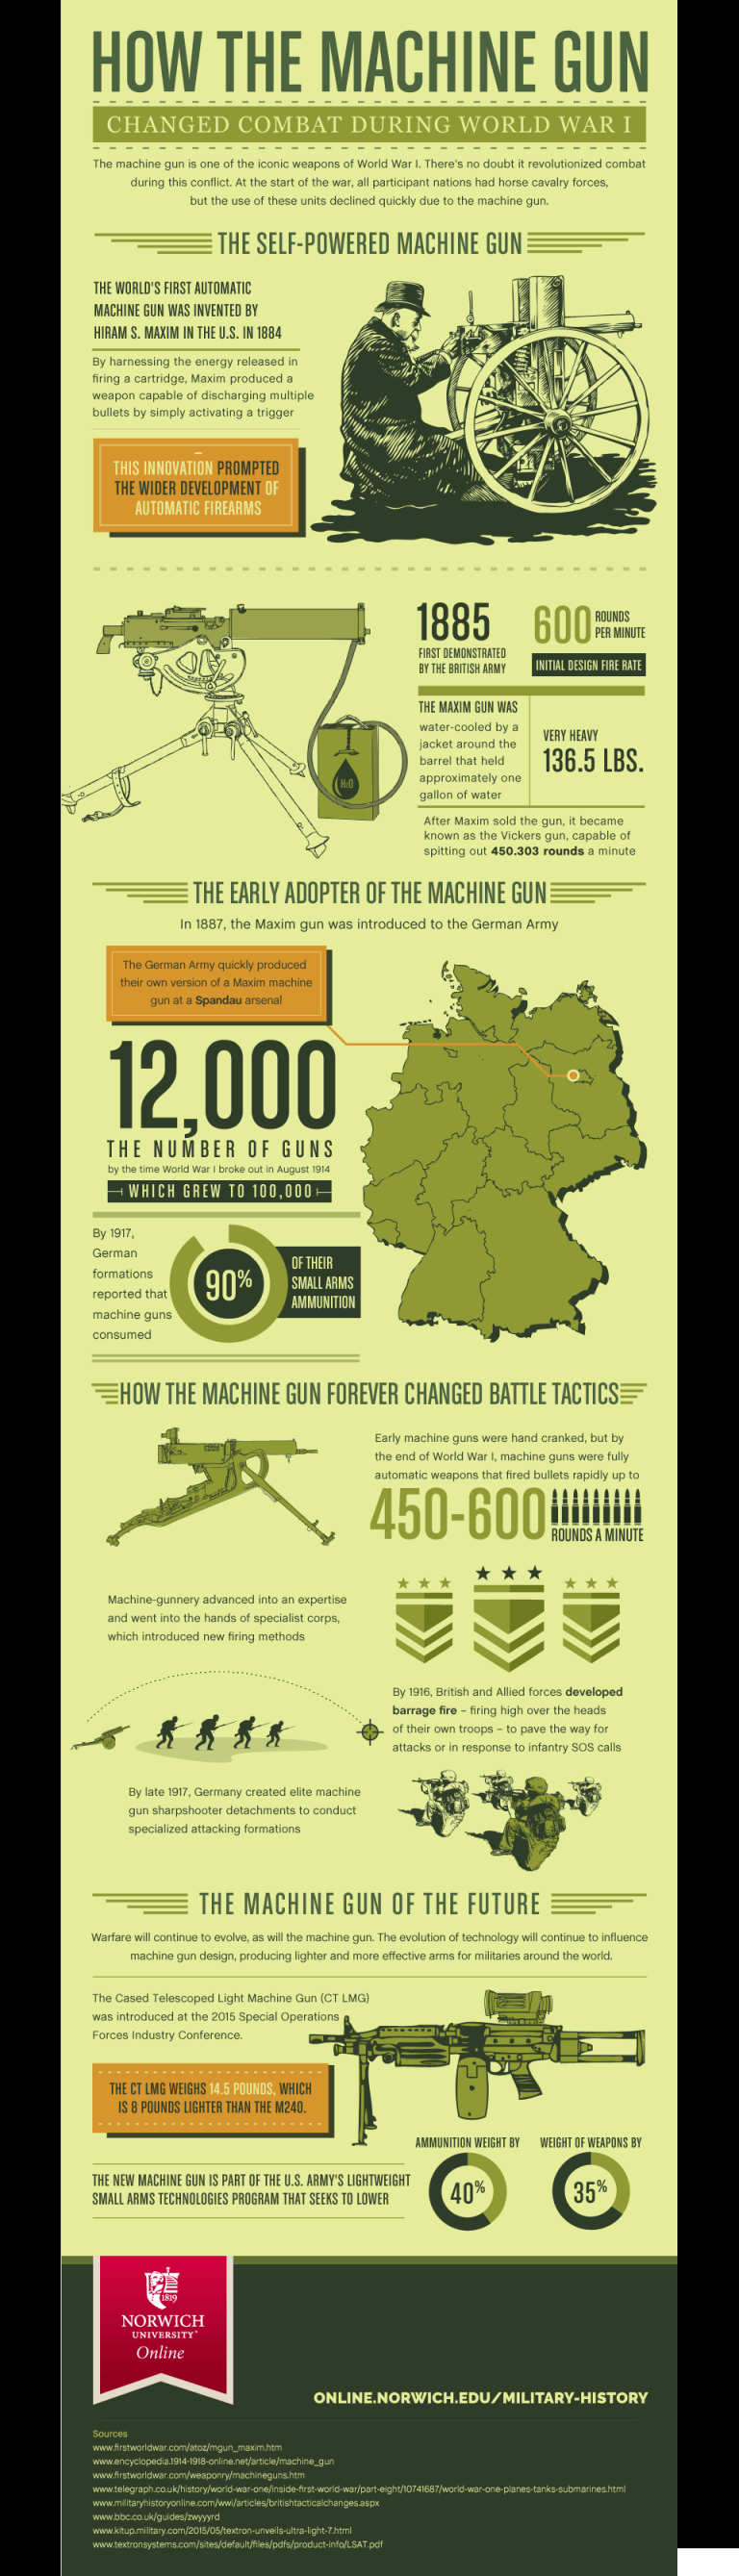 Infographic for How The Machine Gun Changed Combat During World War I